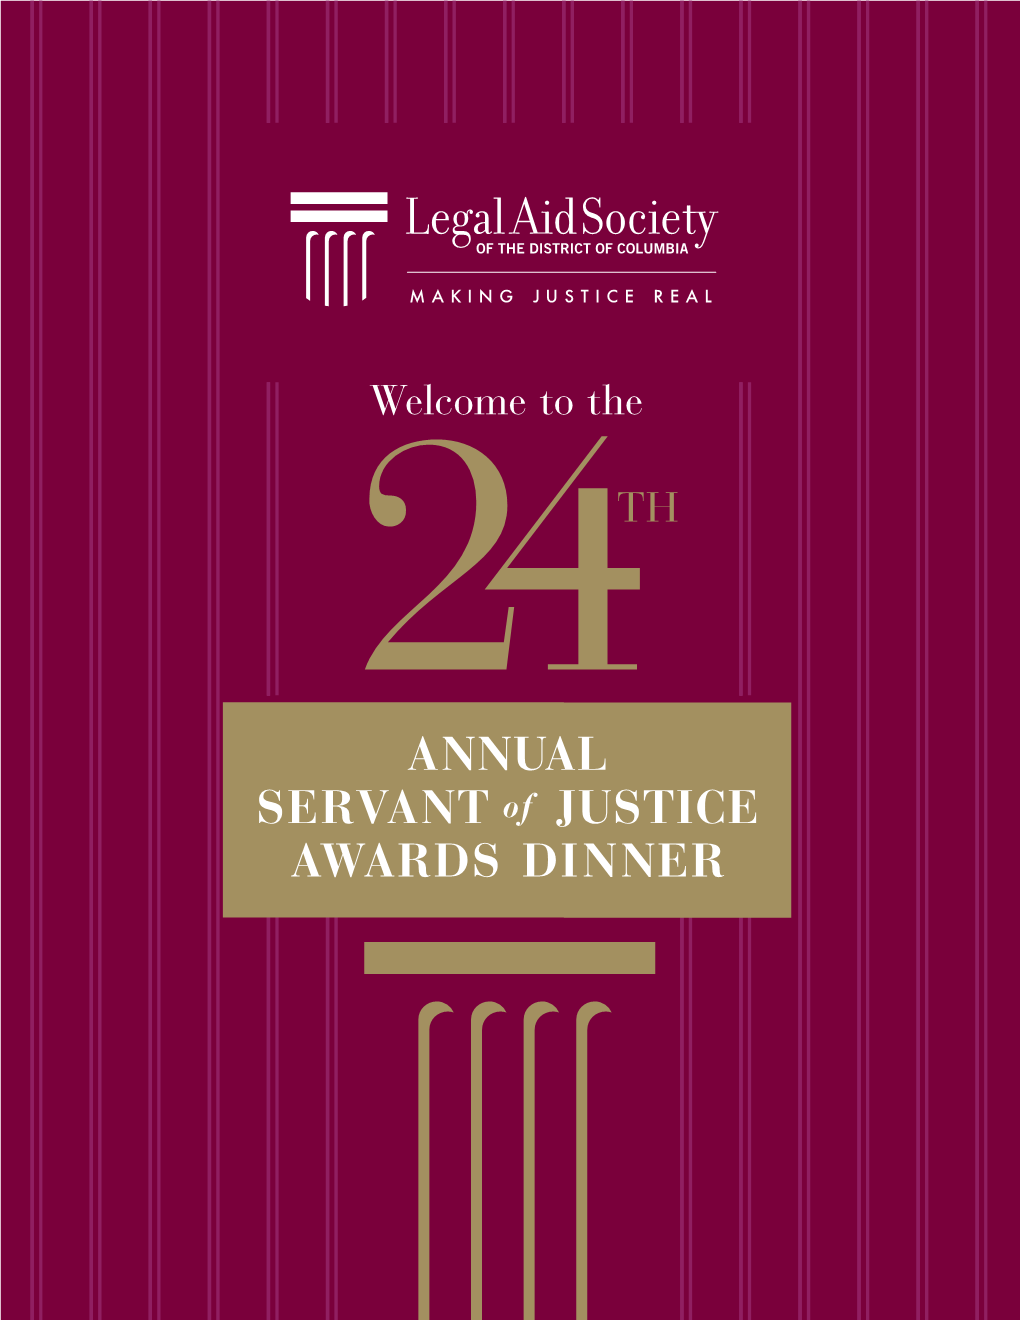 ANNUAL SERVANT of JUSTICE AWARDS DINNER